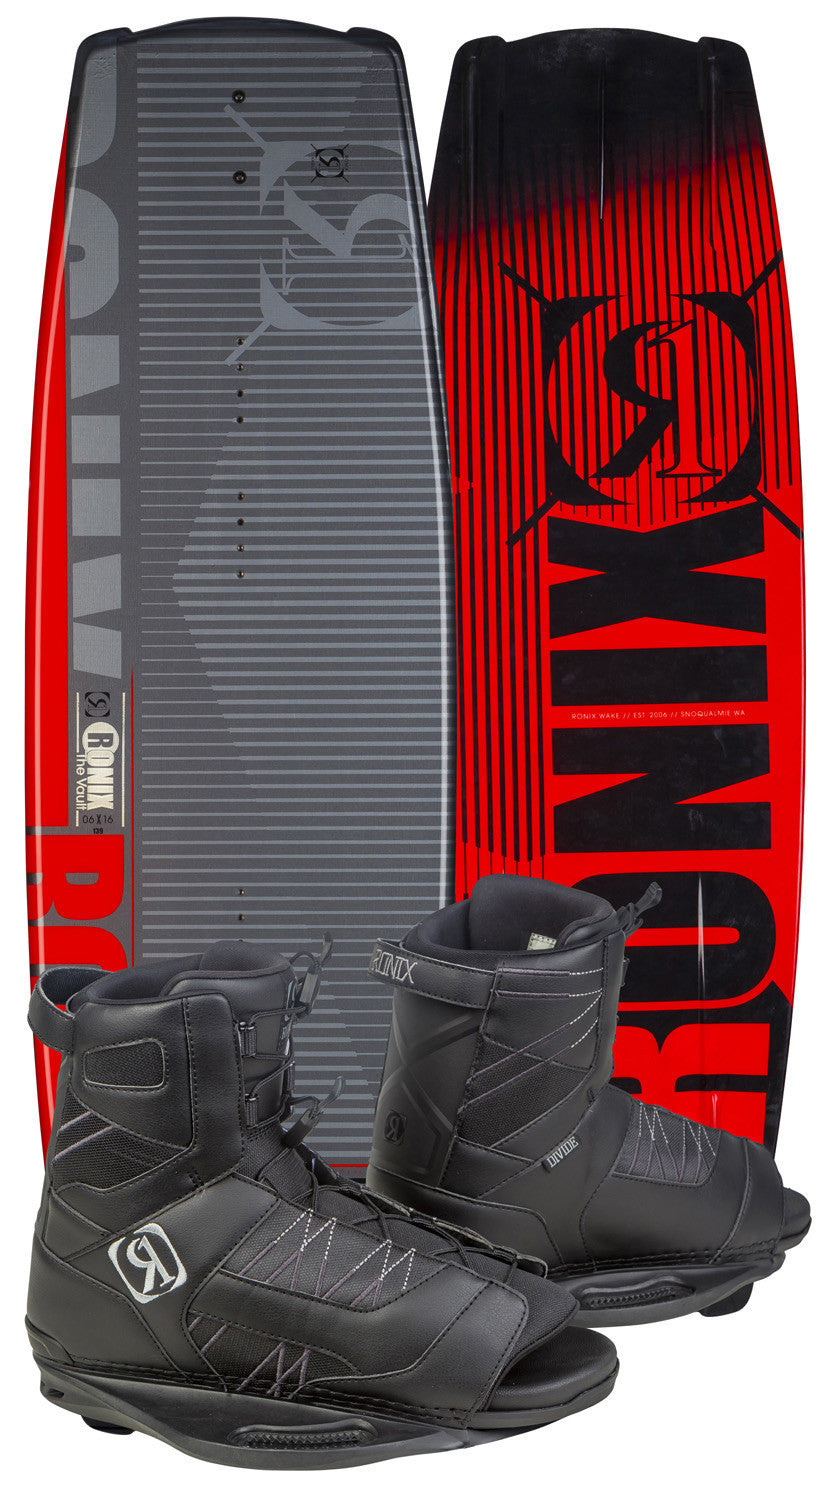 Buy wakeboard packages at 88 gear